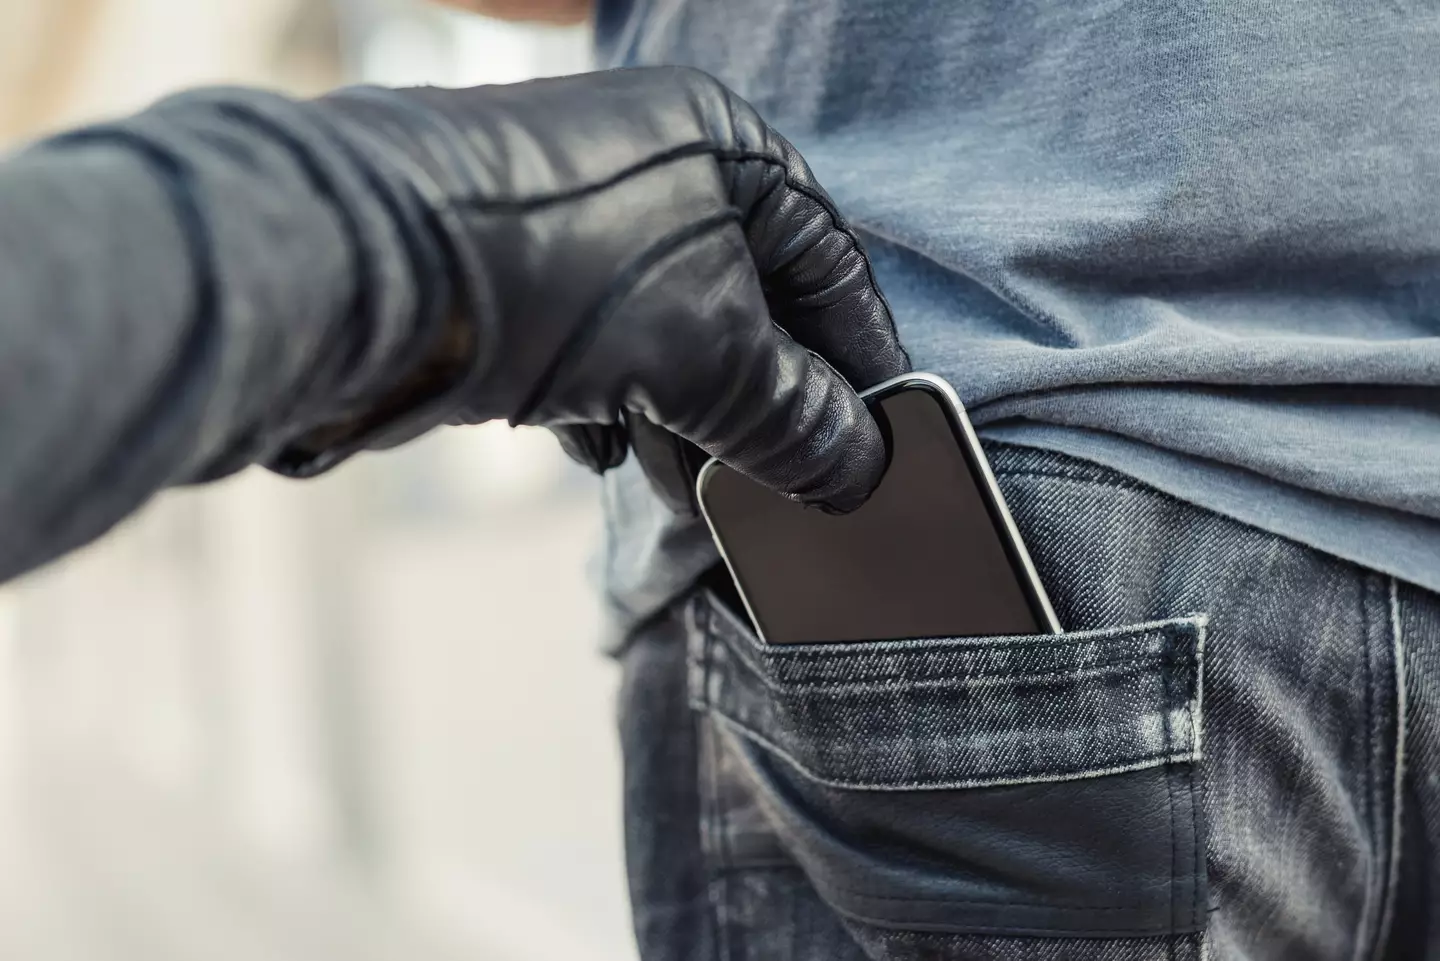 There are measures you can take if your phone is stolen.